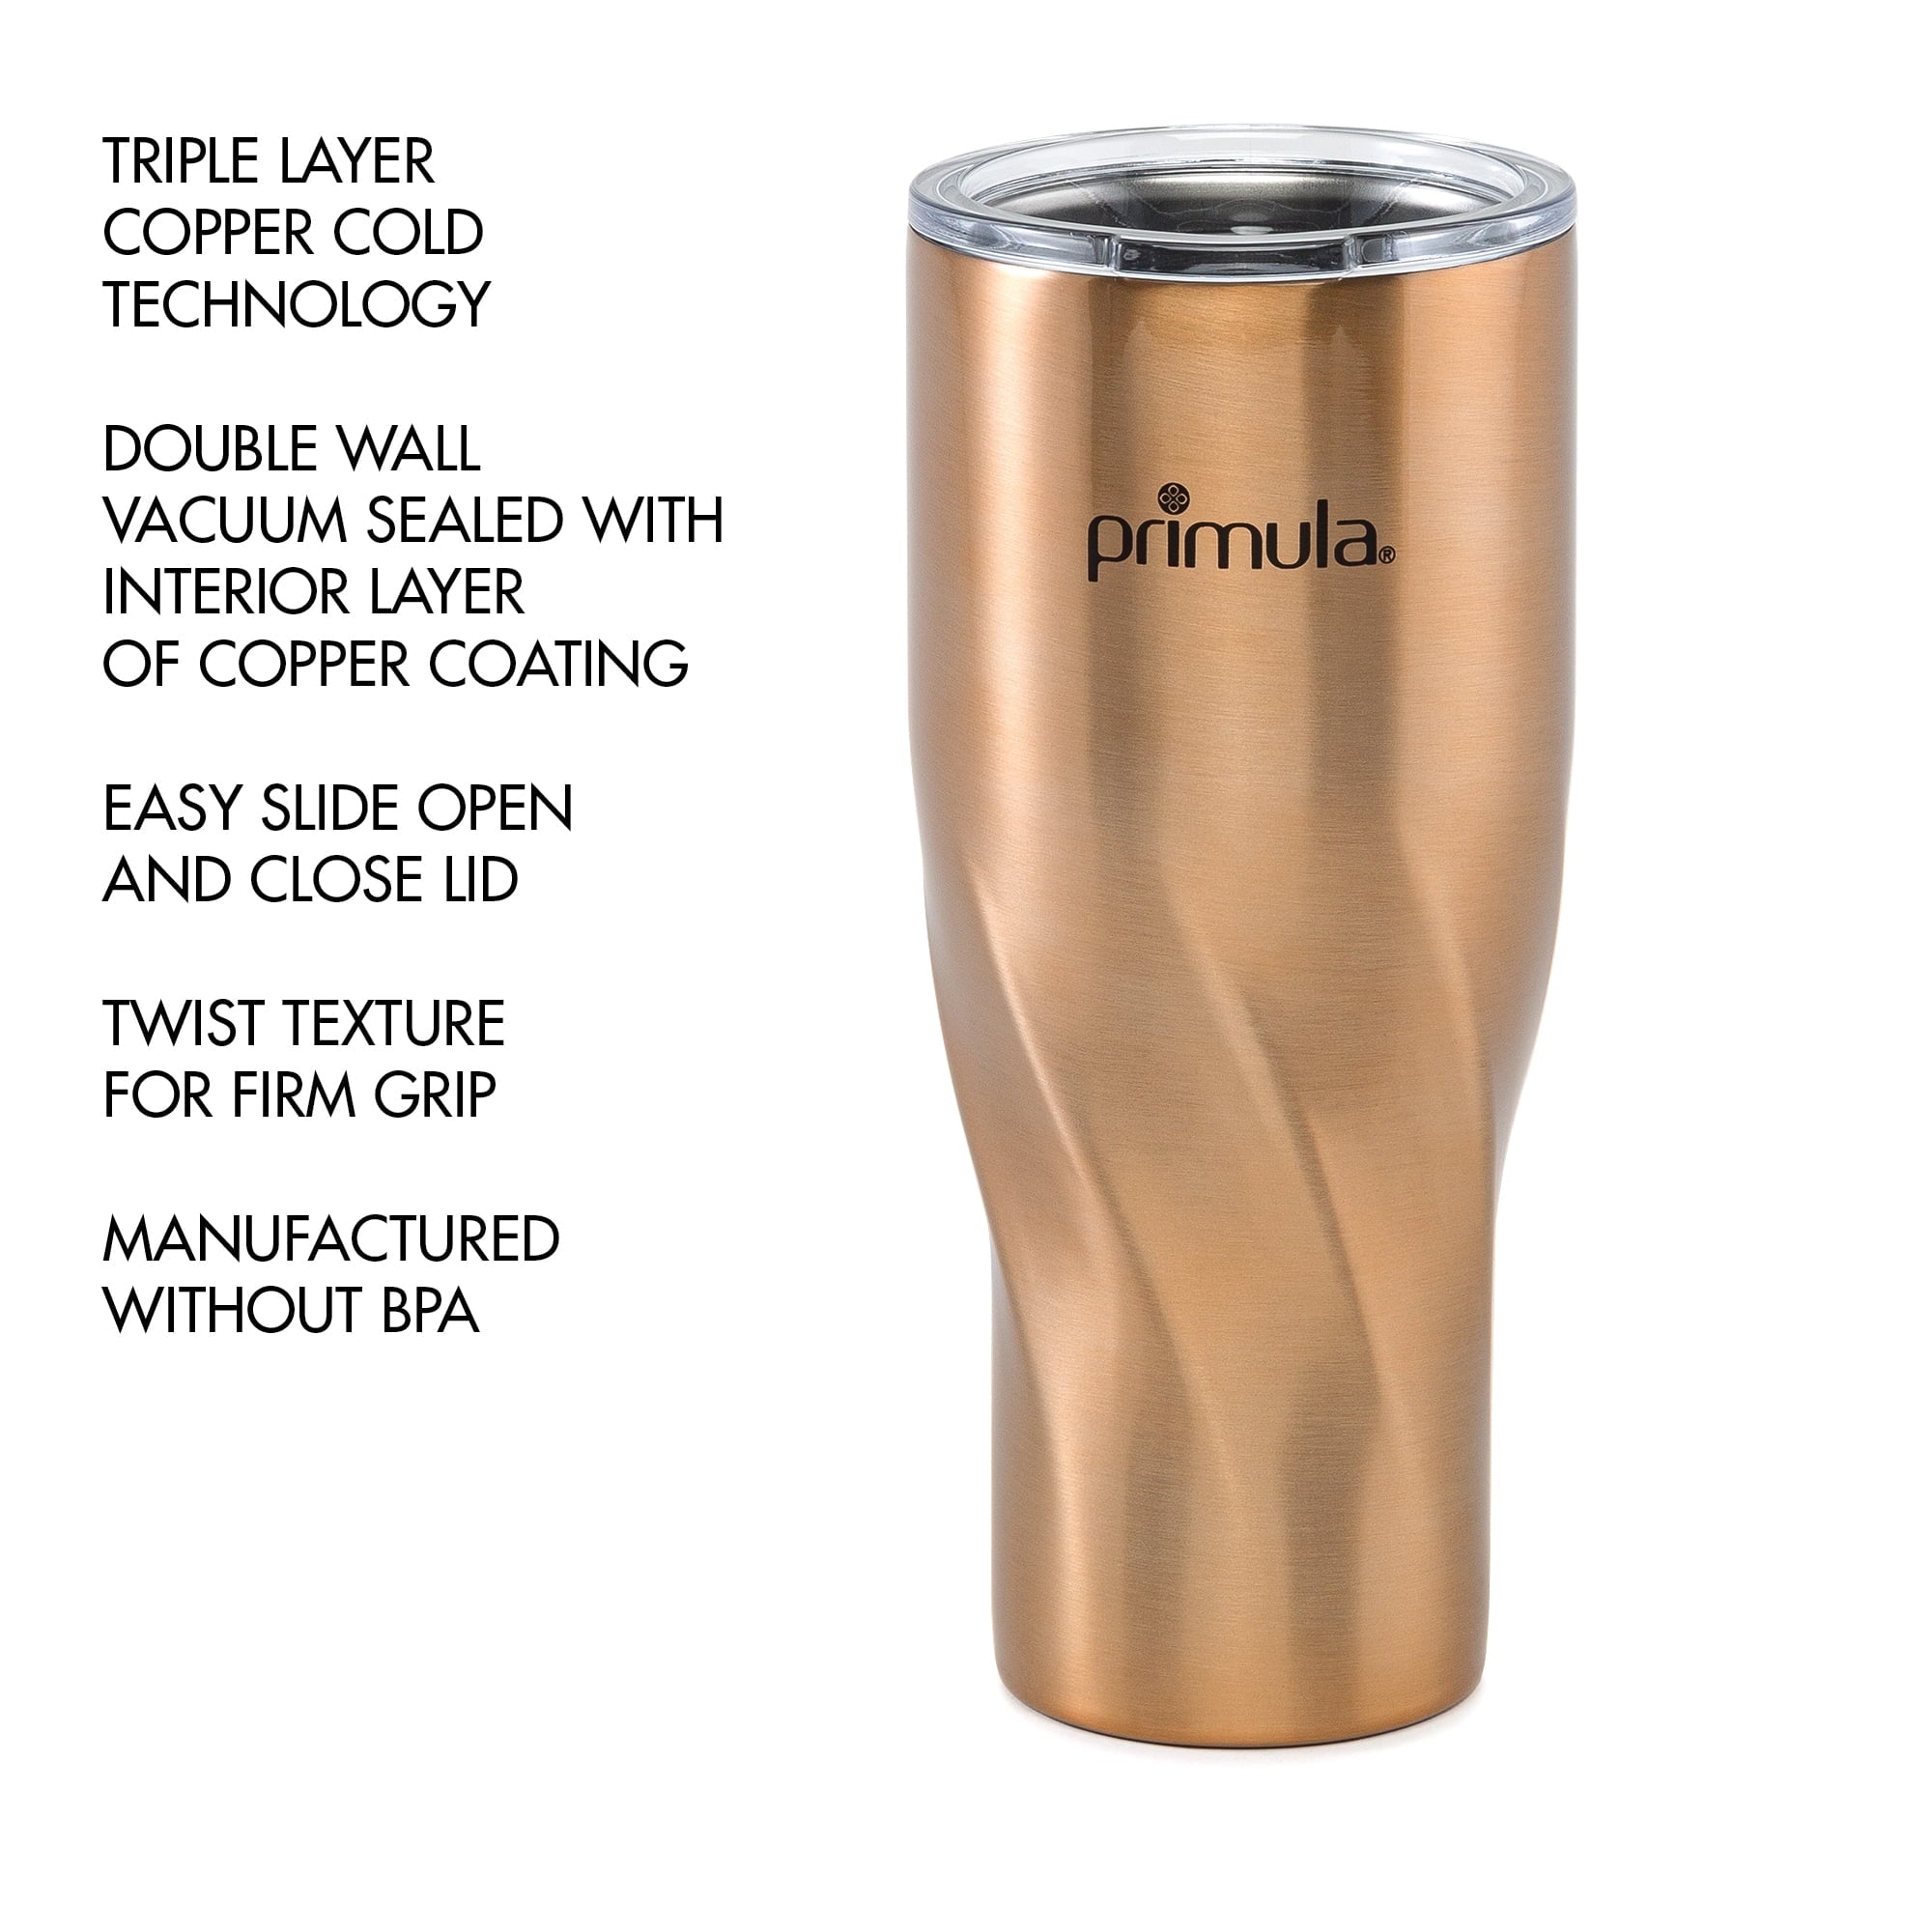 Primula Avalanche Double Walled Vacuum Sealed Stainless Steel Thermal Insulated Tumbler, Stays Cold or Hot All Day Long, Reusable Thermos, 32oz., Copper or Brushed Stainless Steel